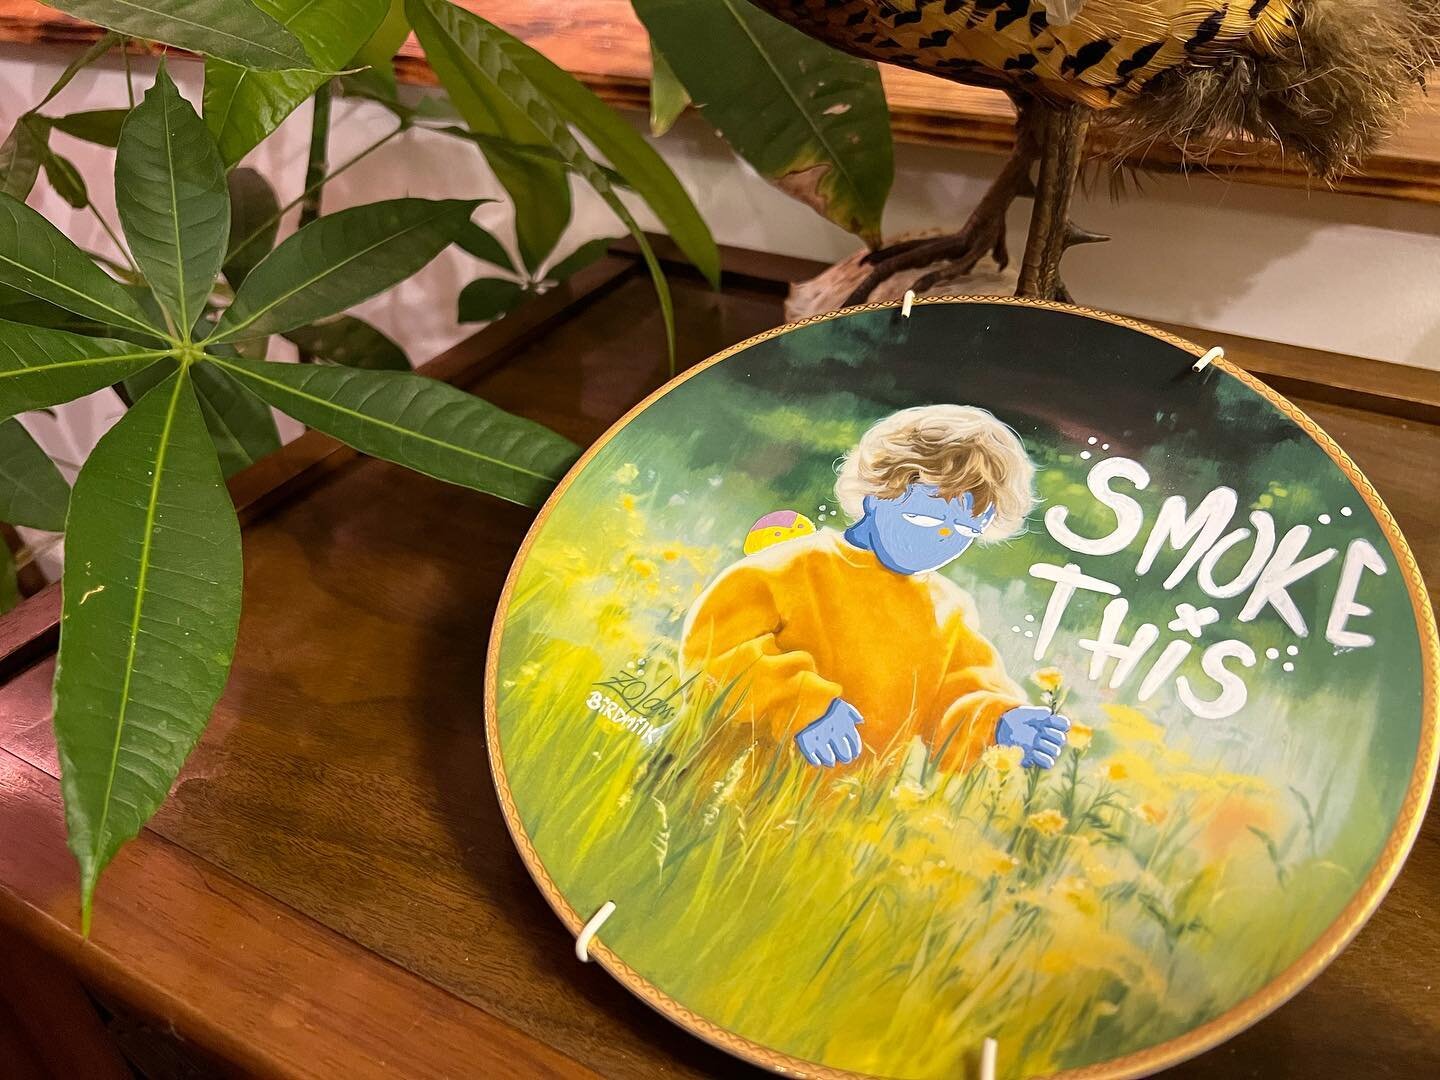 Painted up this little boy on a decorative hanging plate for @weed.rich show FULL BUST vol 3. 
.
.
Tickets for the event are sold out so if you snoozed&hellip;.I&rsquo;m afraid you losed&hellip;.there will be so much cool art at the event along with 